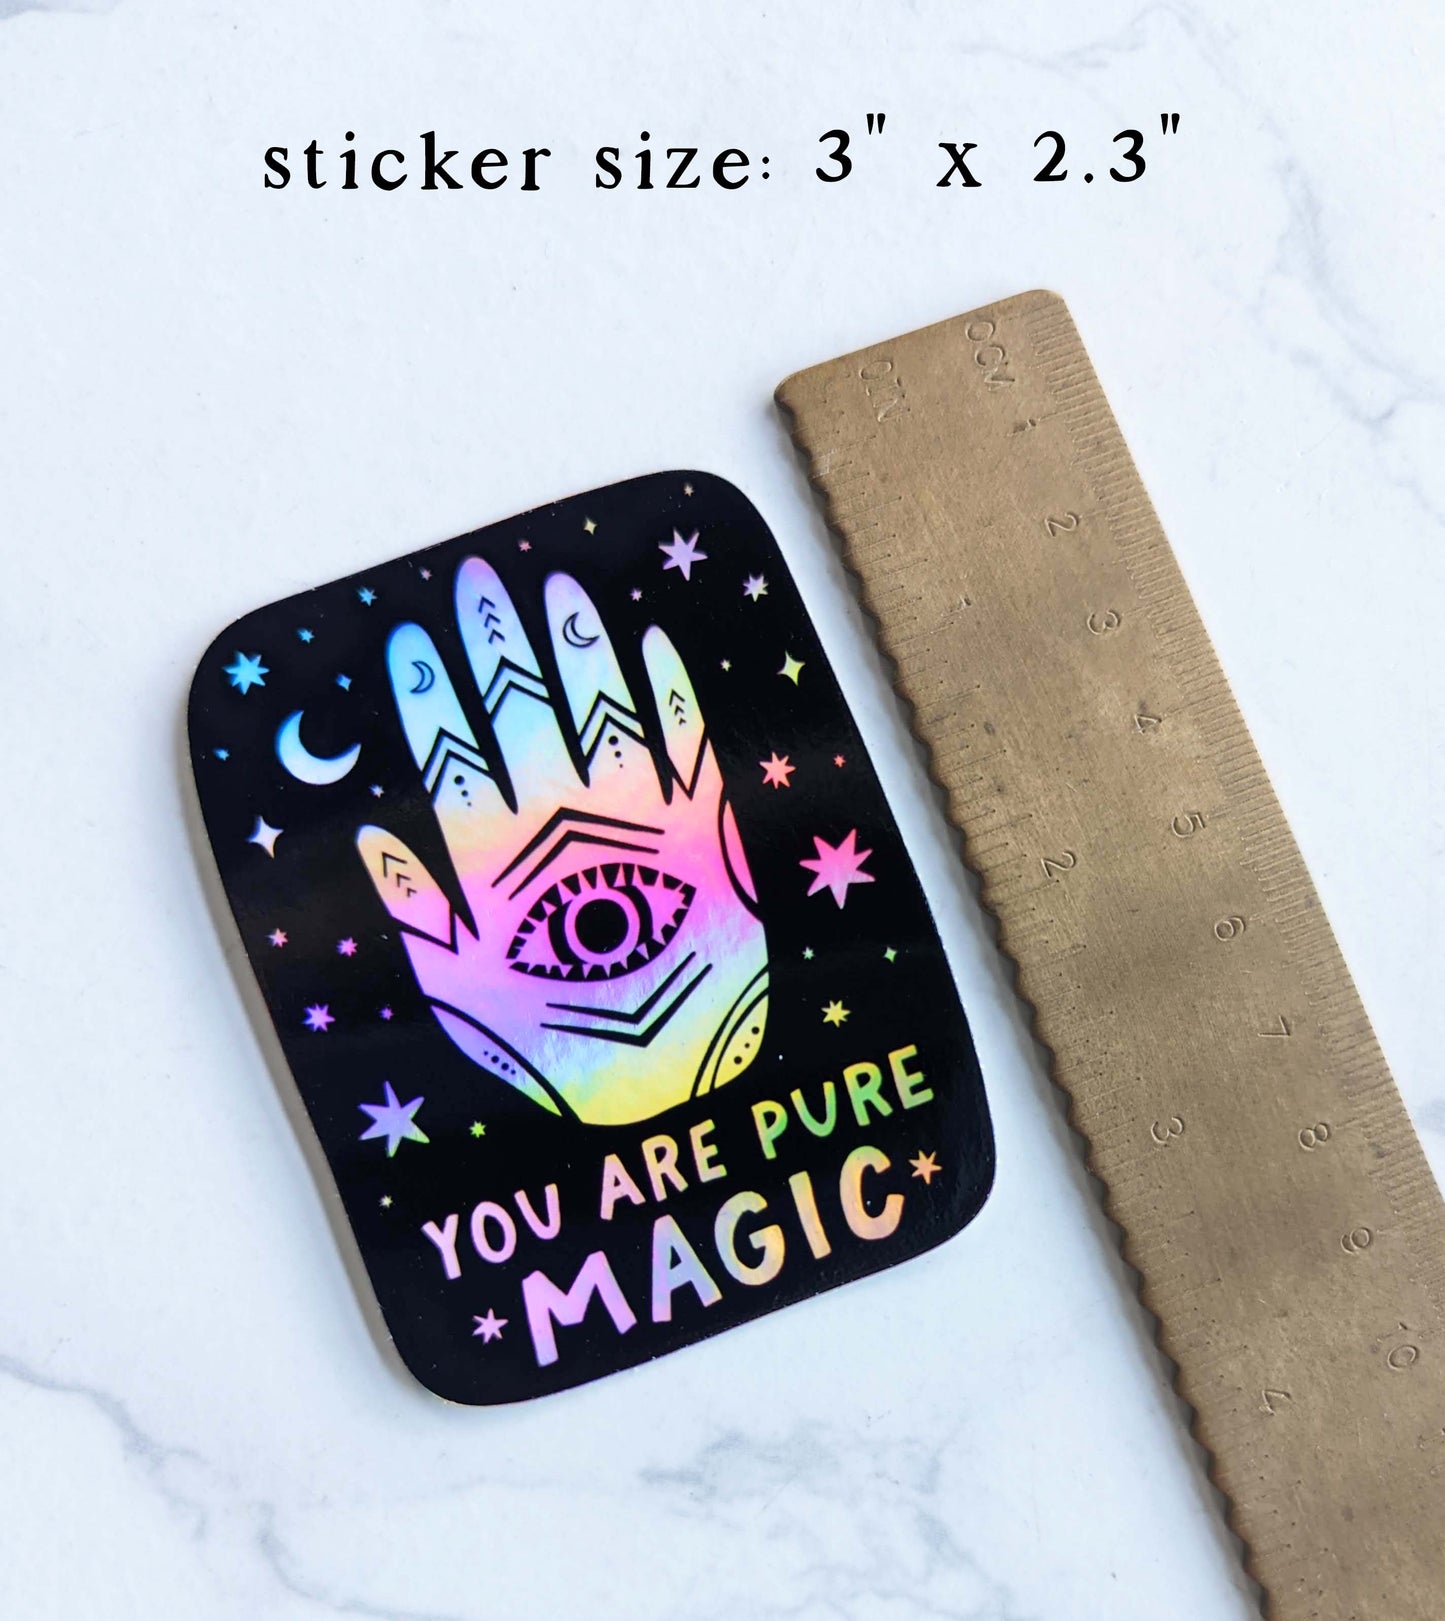 "You are Pure Magic" Hand Evil Eye Holographic Vinyl Sticker